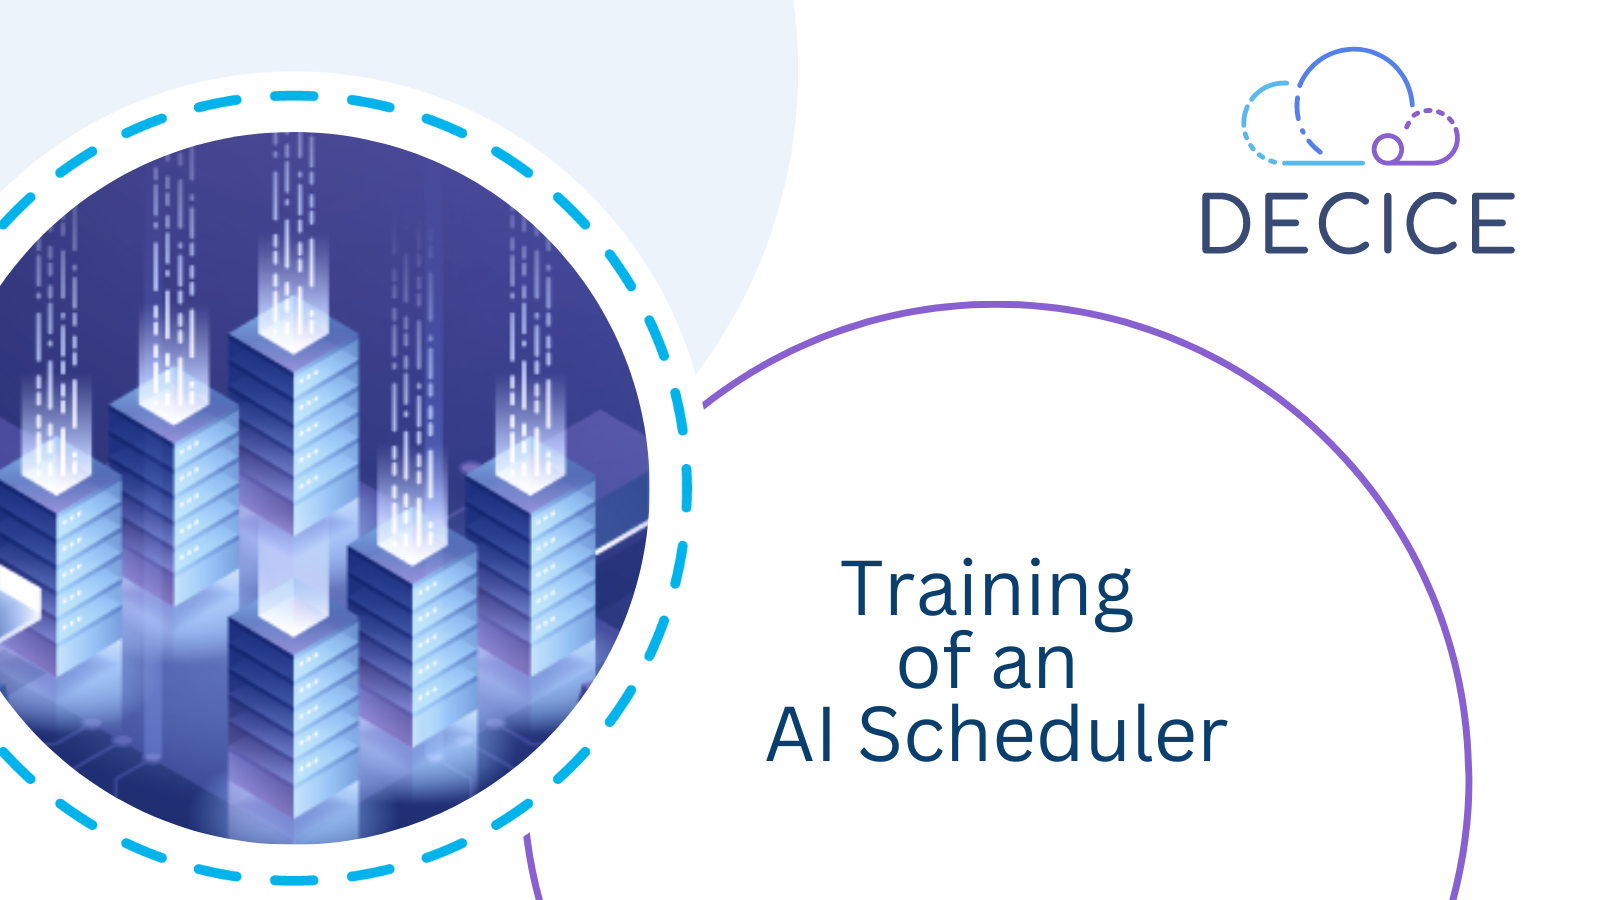 With the DECICE project we have set out to develop a machine learning (ML)-based scheduler that is able to outperform heuristic schedulers in terms of finding better workload placements on a given compute cluster with regards to performance, reliability and energy efficiency.